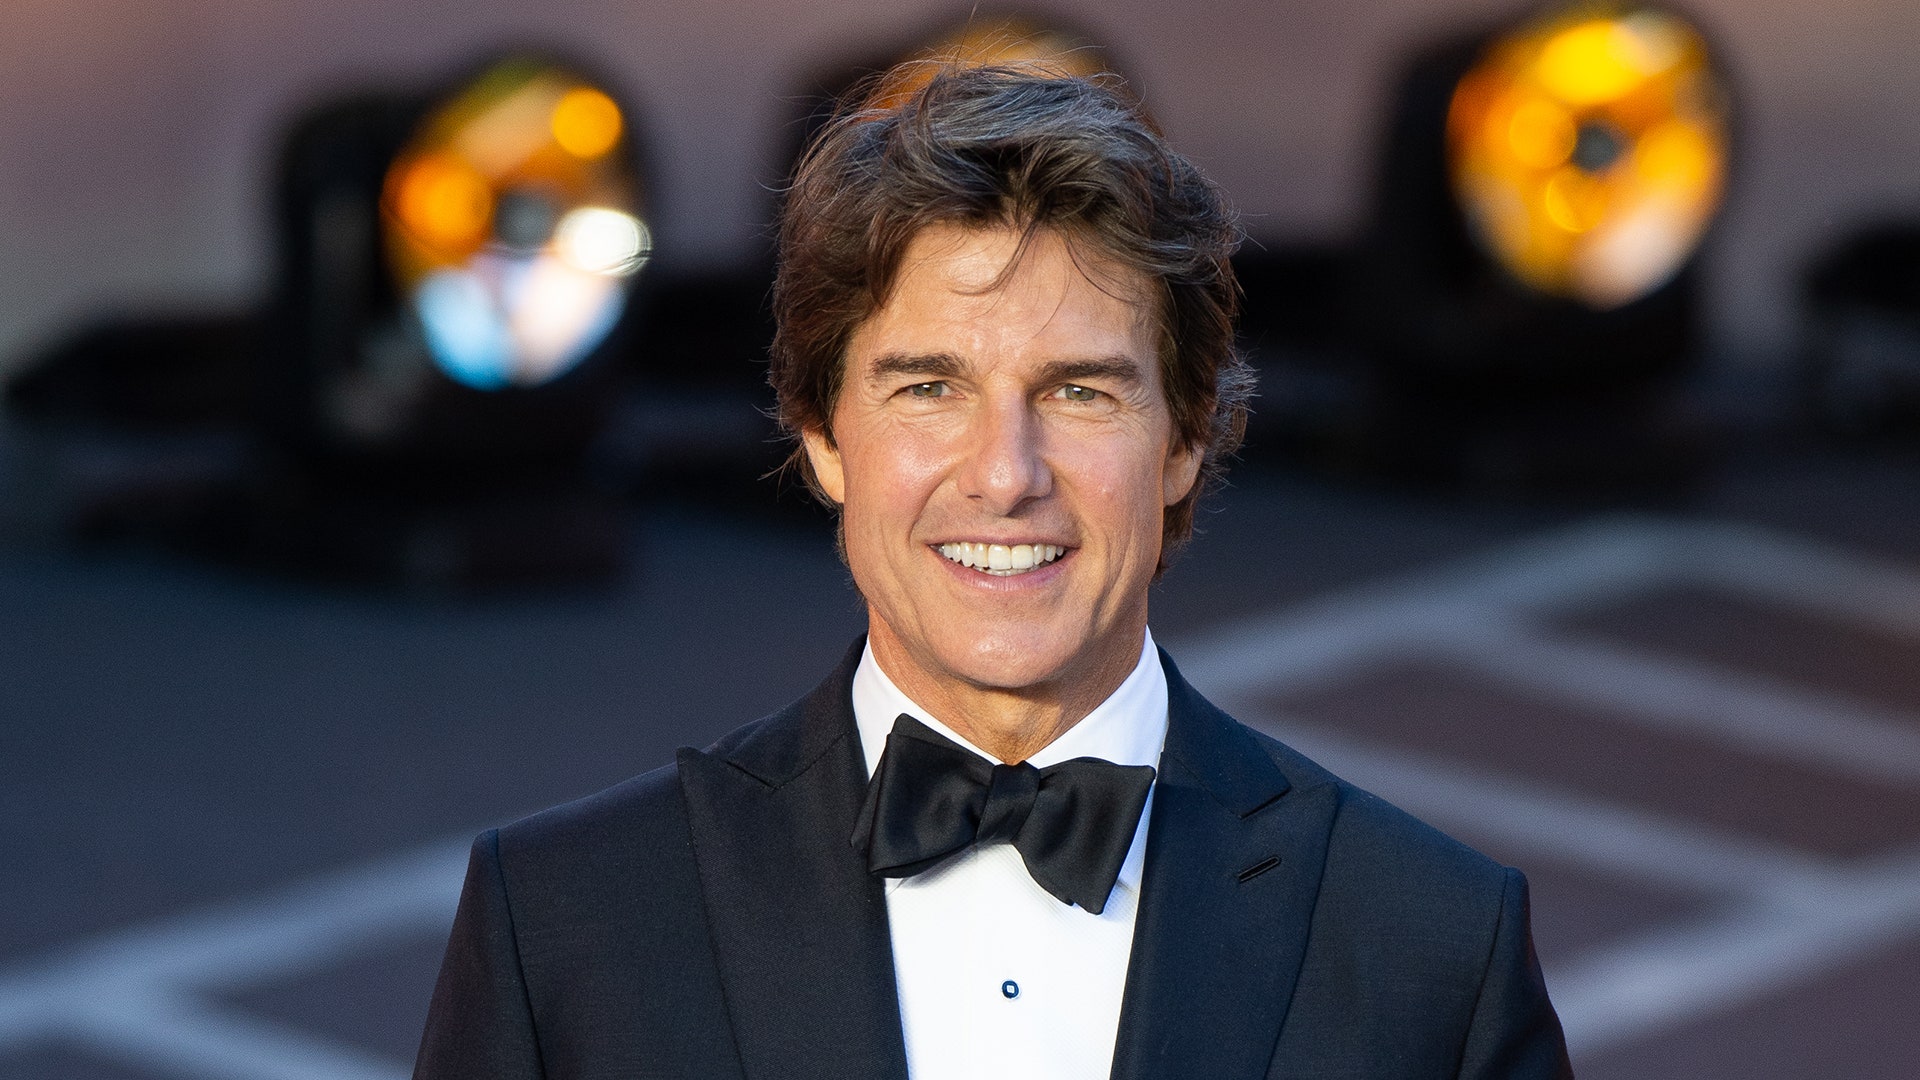 Tom Cruise disguises himself to watch movies in theatres